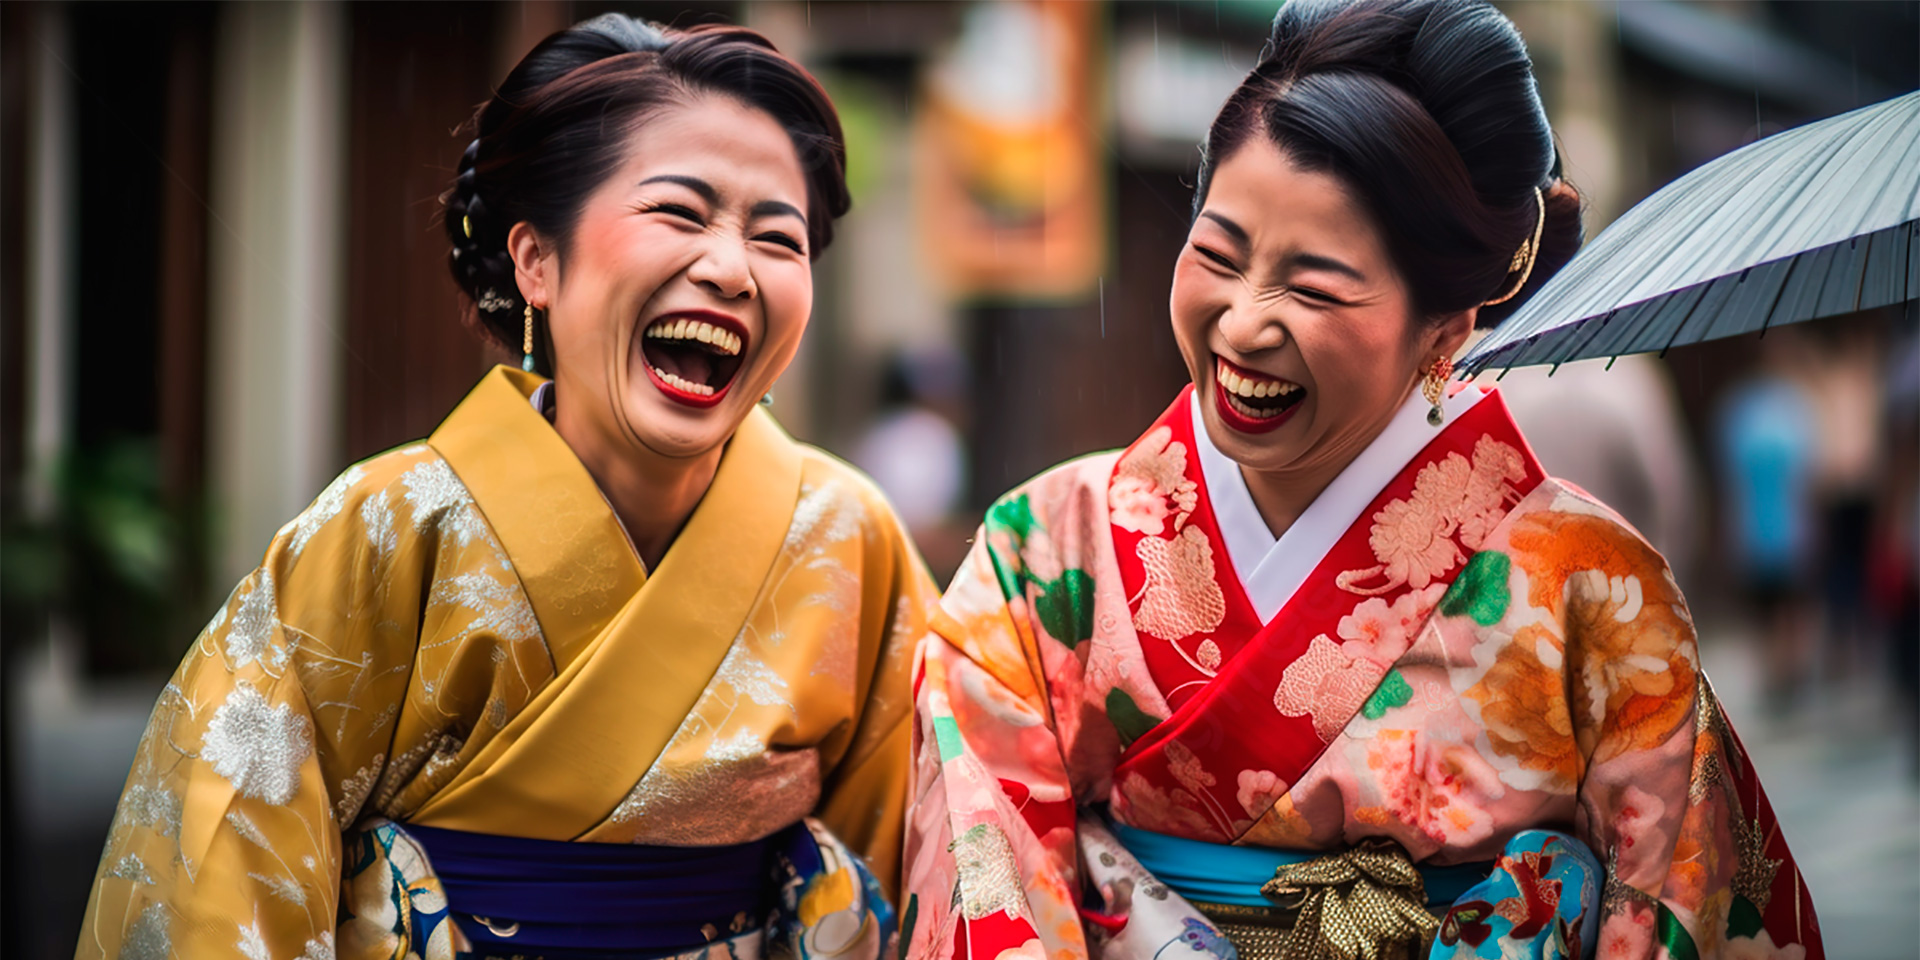 laughing in Japanese